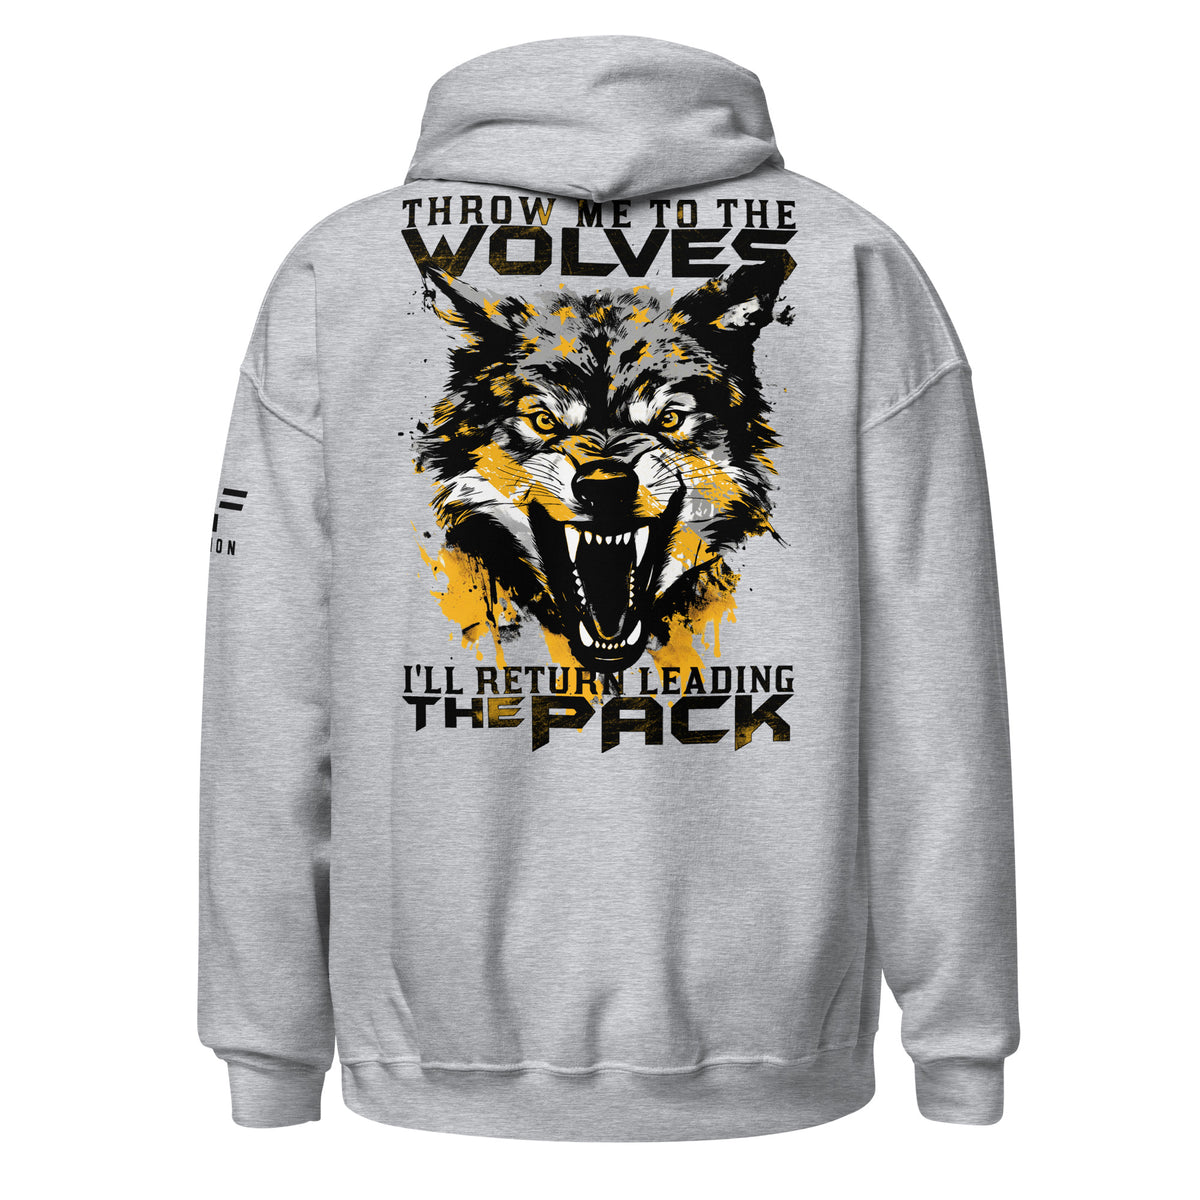 Throw Me to The Wolves 2.0 Hoodie